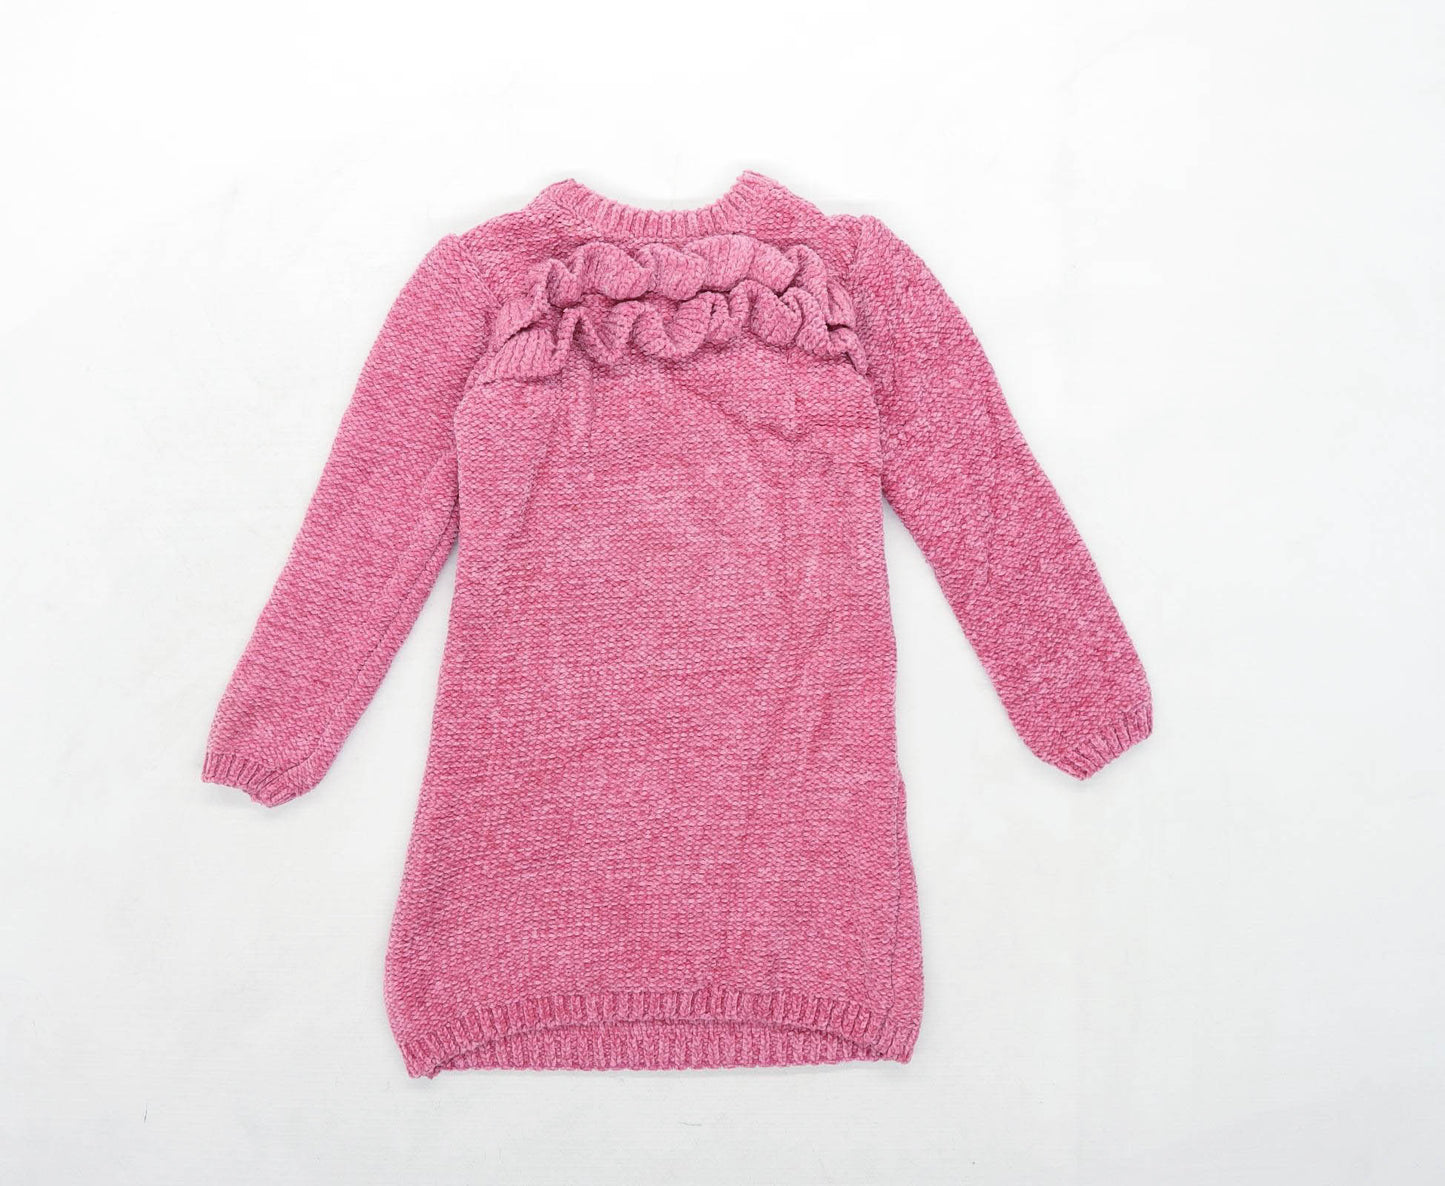 Primark Girls Pink Frill Dress Age 7-8 Years